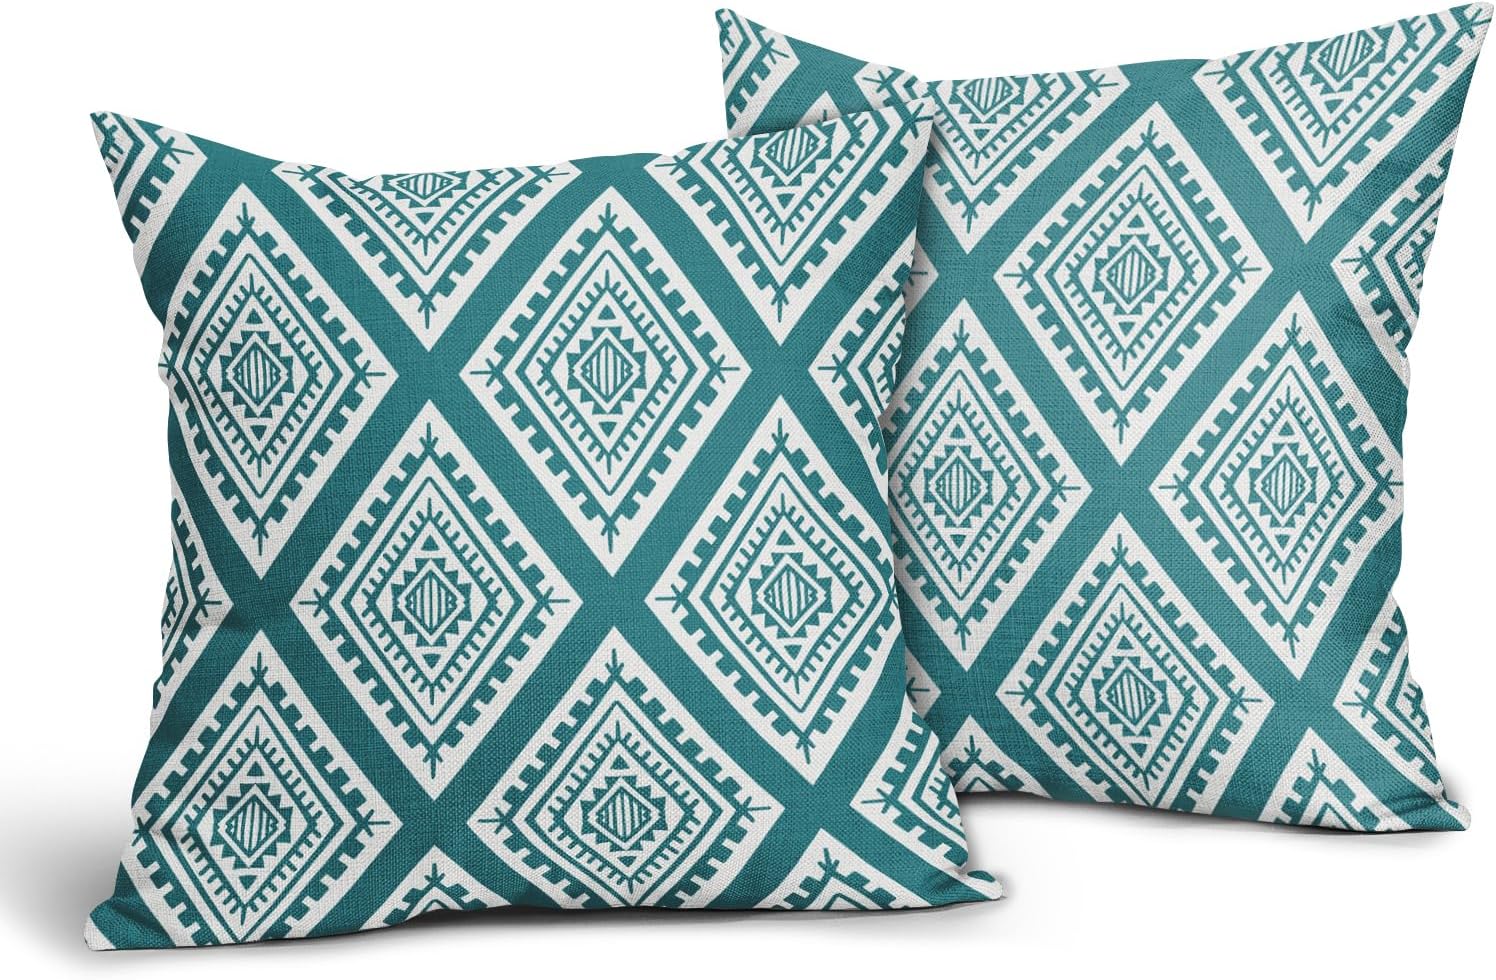 ABSOP Teal Pillow Covers 18x18 Inch Set of 2 Turquoise Boho Throw Pillow Covers Geometric Modern Pillowscase Linen Square Cushion Covers for Bedroom Sofa Couch Living Room Outdoor Home Decor